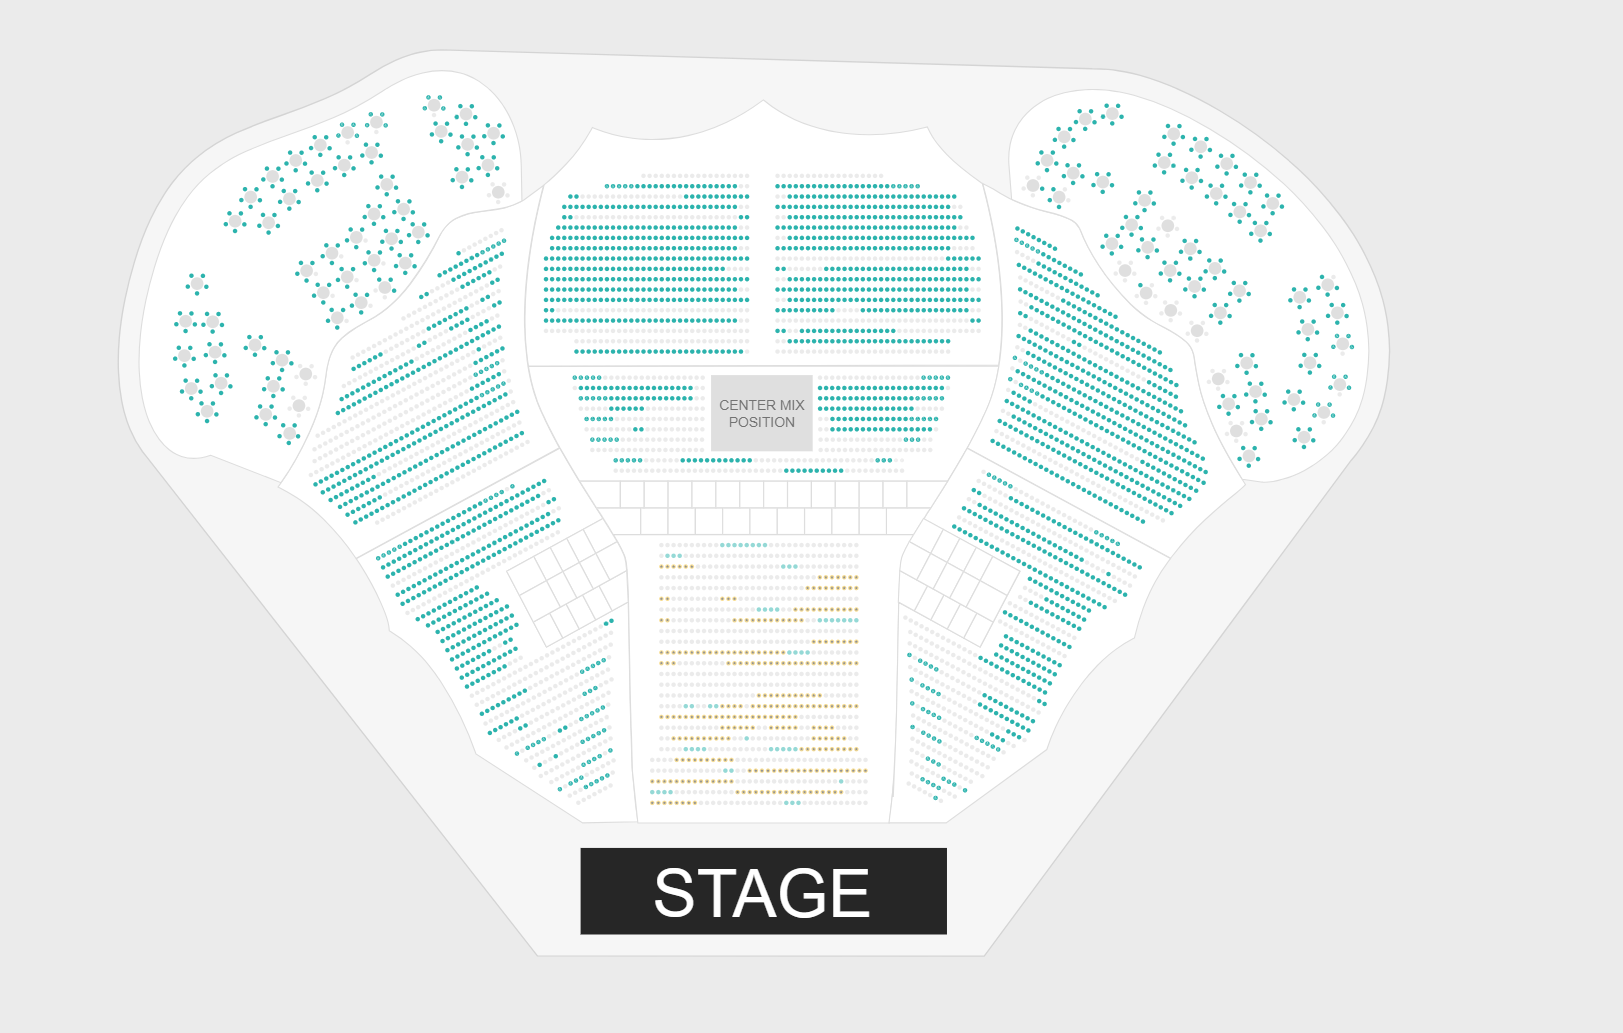 Official Platinum seats are priced at $383, while seats in section three are $111, and seats in section five are $54